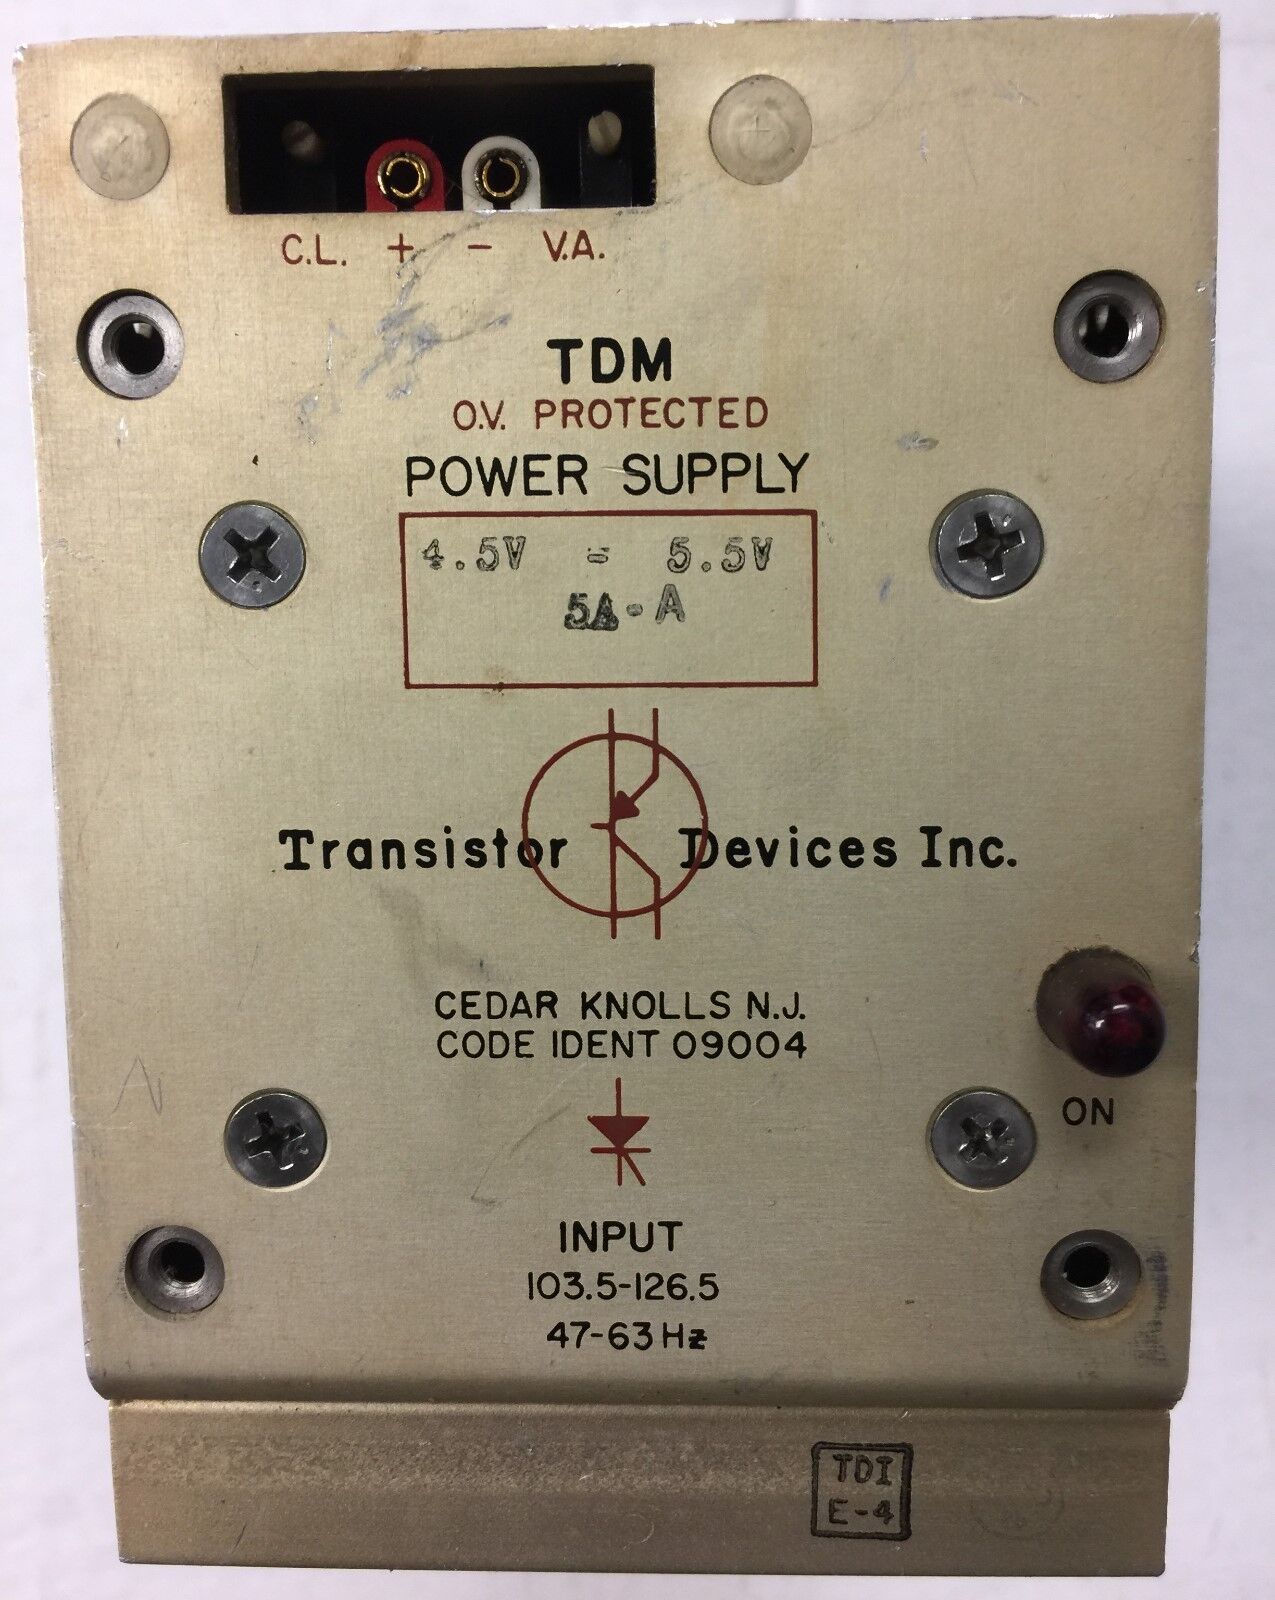 Transistor Devices O.V. Protected Power Supply 120VAC in 4.5-5.5 VDC out, 5A